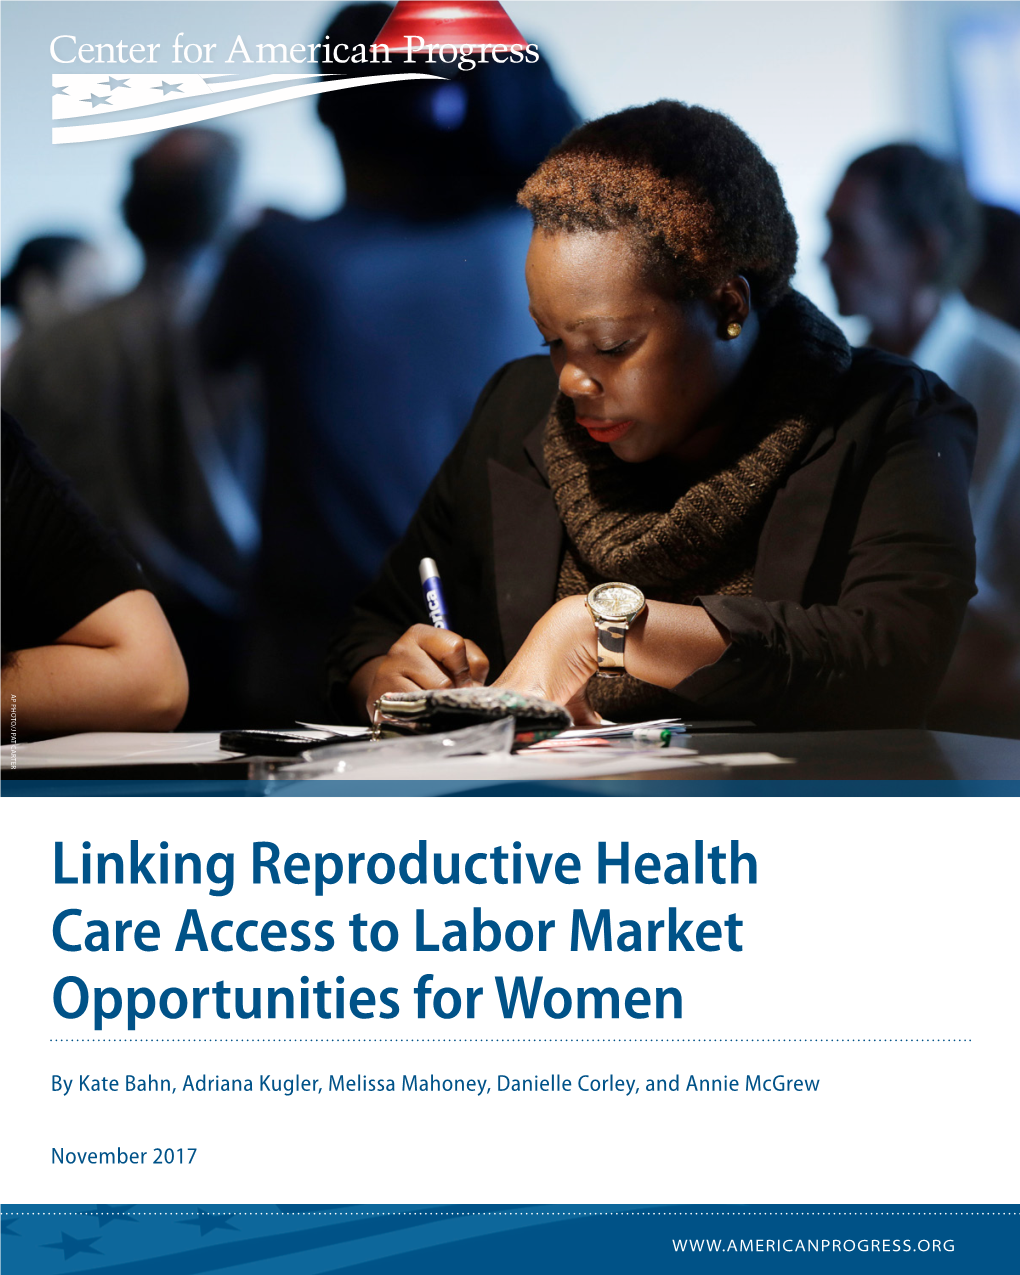 Linking Reproductive Health Care Access to Labor Market Opportunities for Women